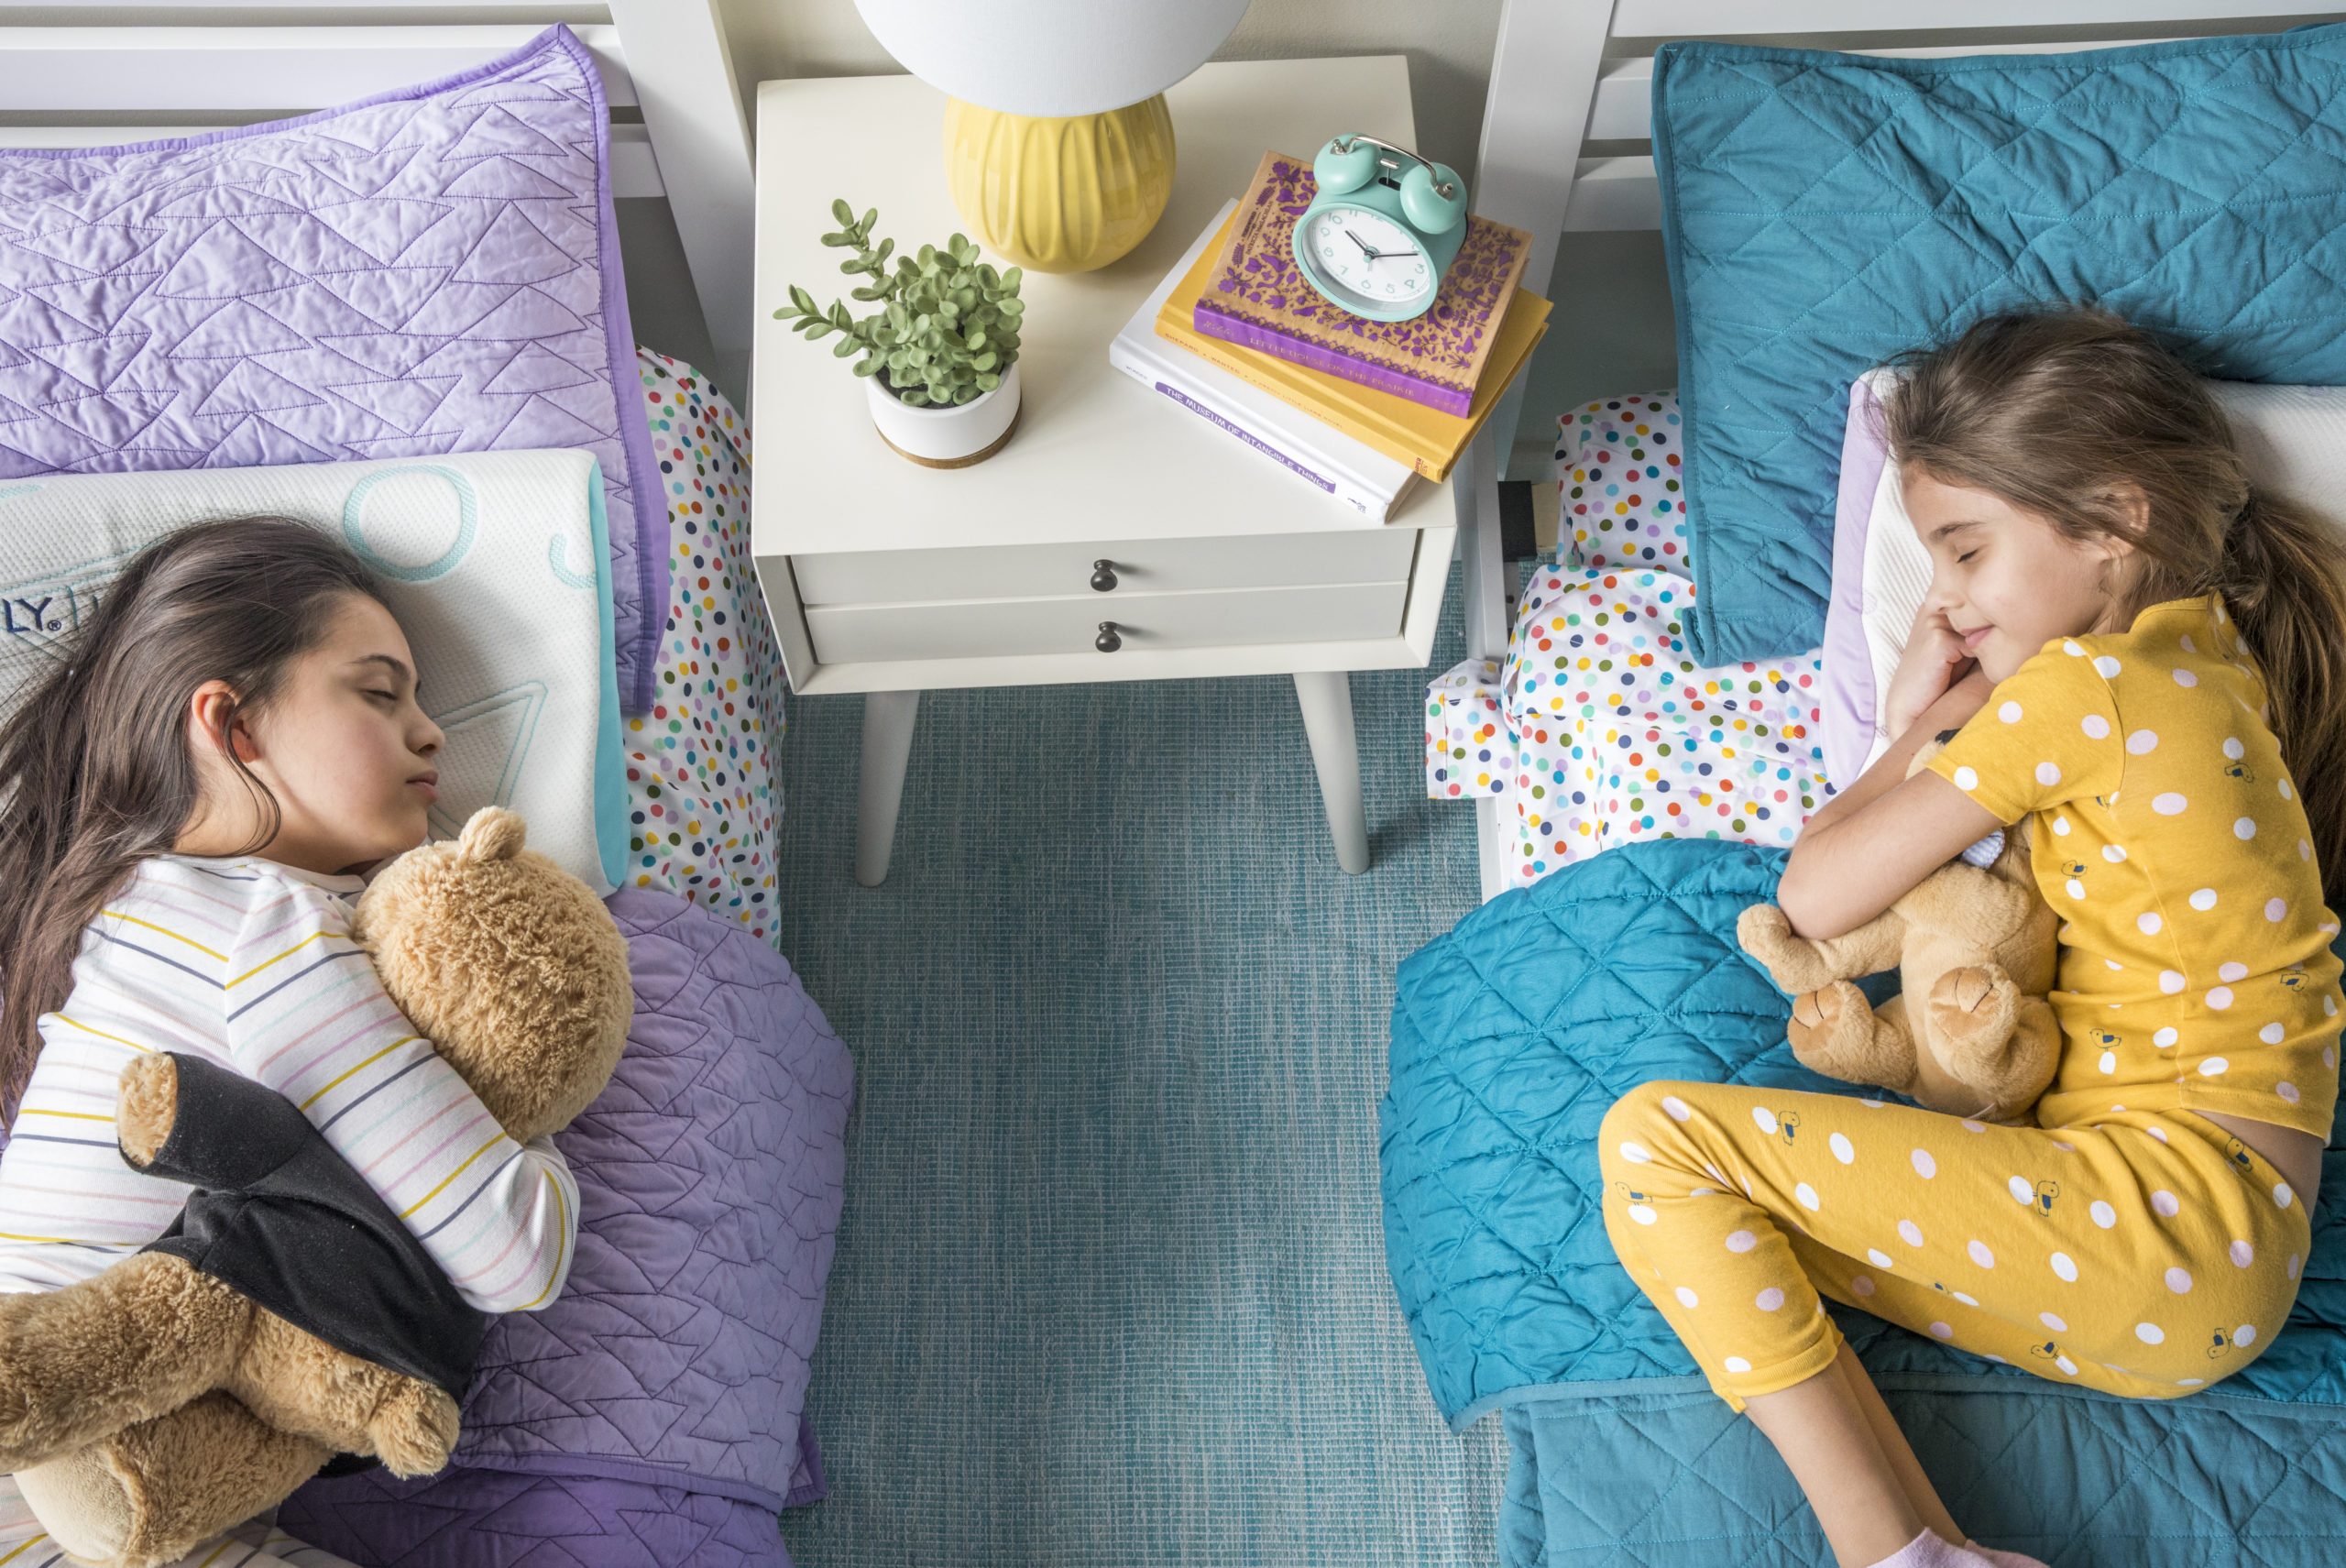 Aerial view of two girls lying in twin beds facing each other, one has purple bedding and one has teal bedding, both girls are hugging stuffed toys.